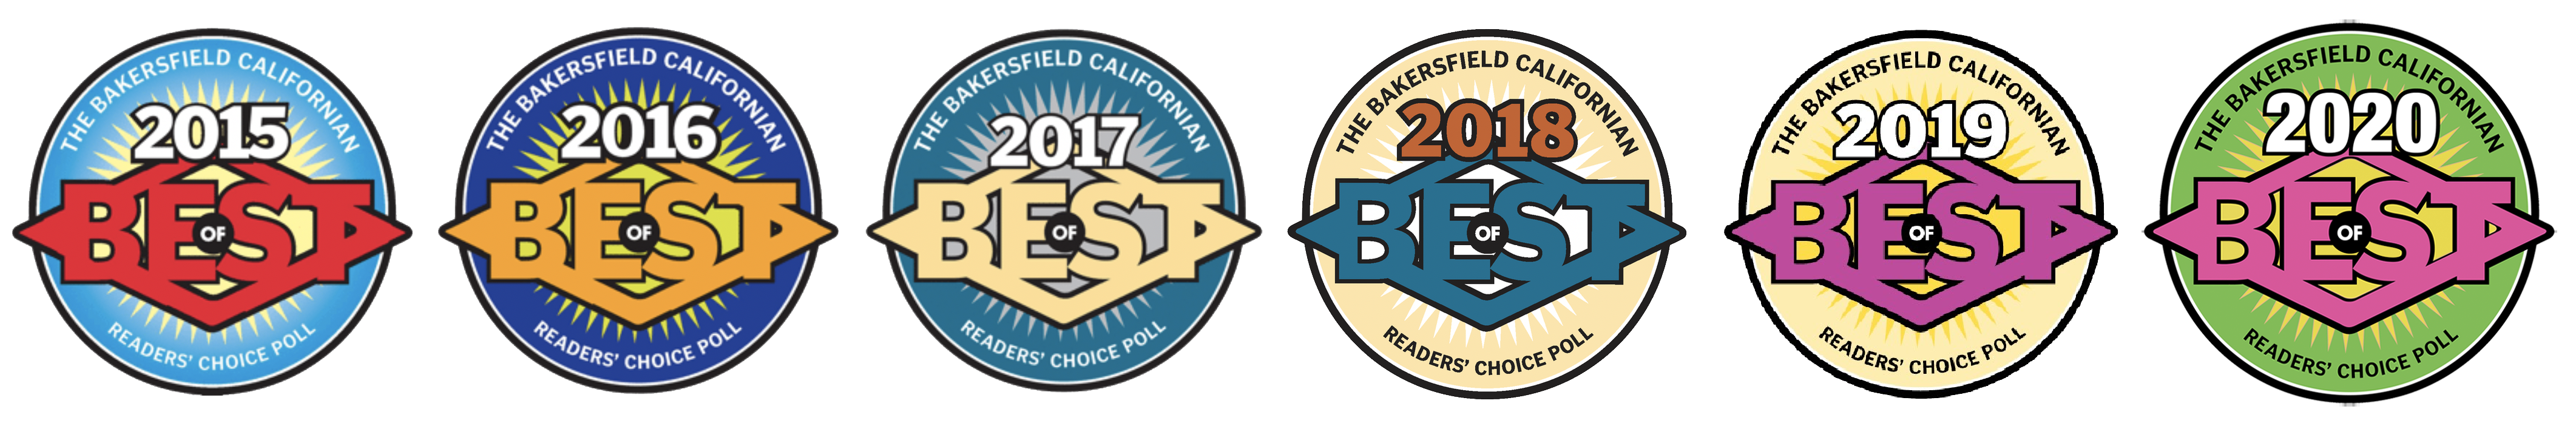 The Bakersfield Californian BEST OF 2015, 2016, 2017, 2018, 2019 and 2020 - Blue Lion Properties Voted Best in Readers' Choice Poll